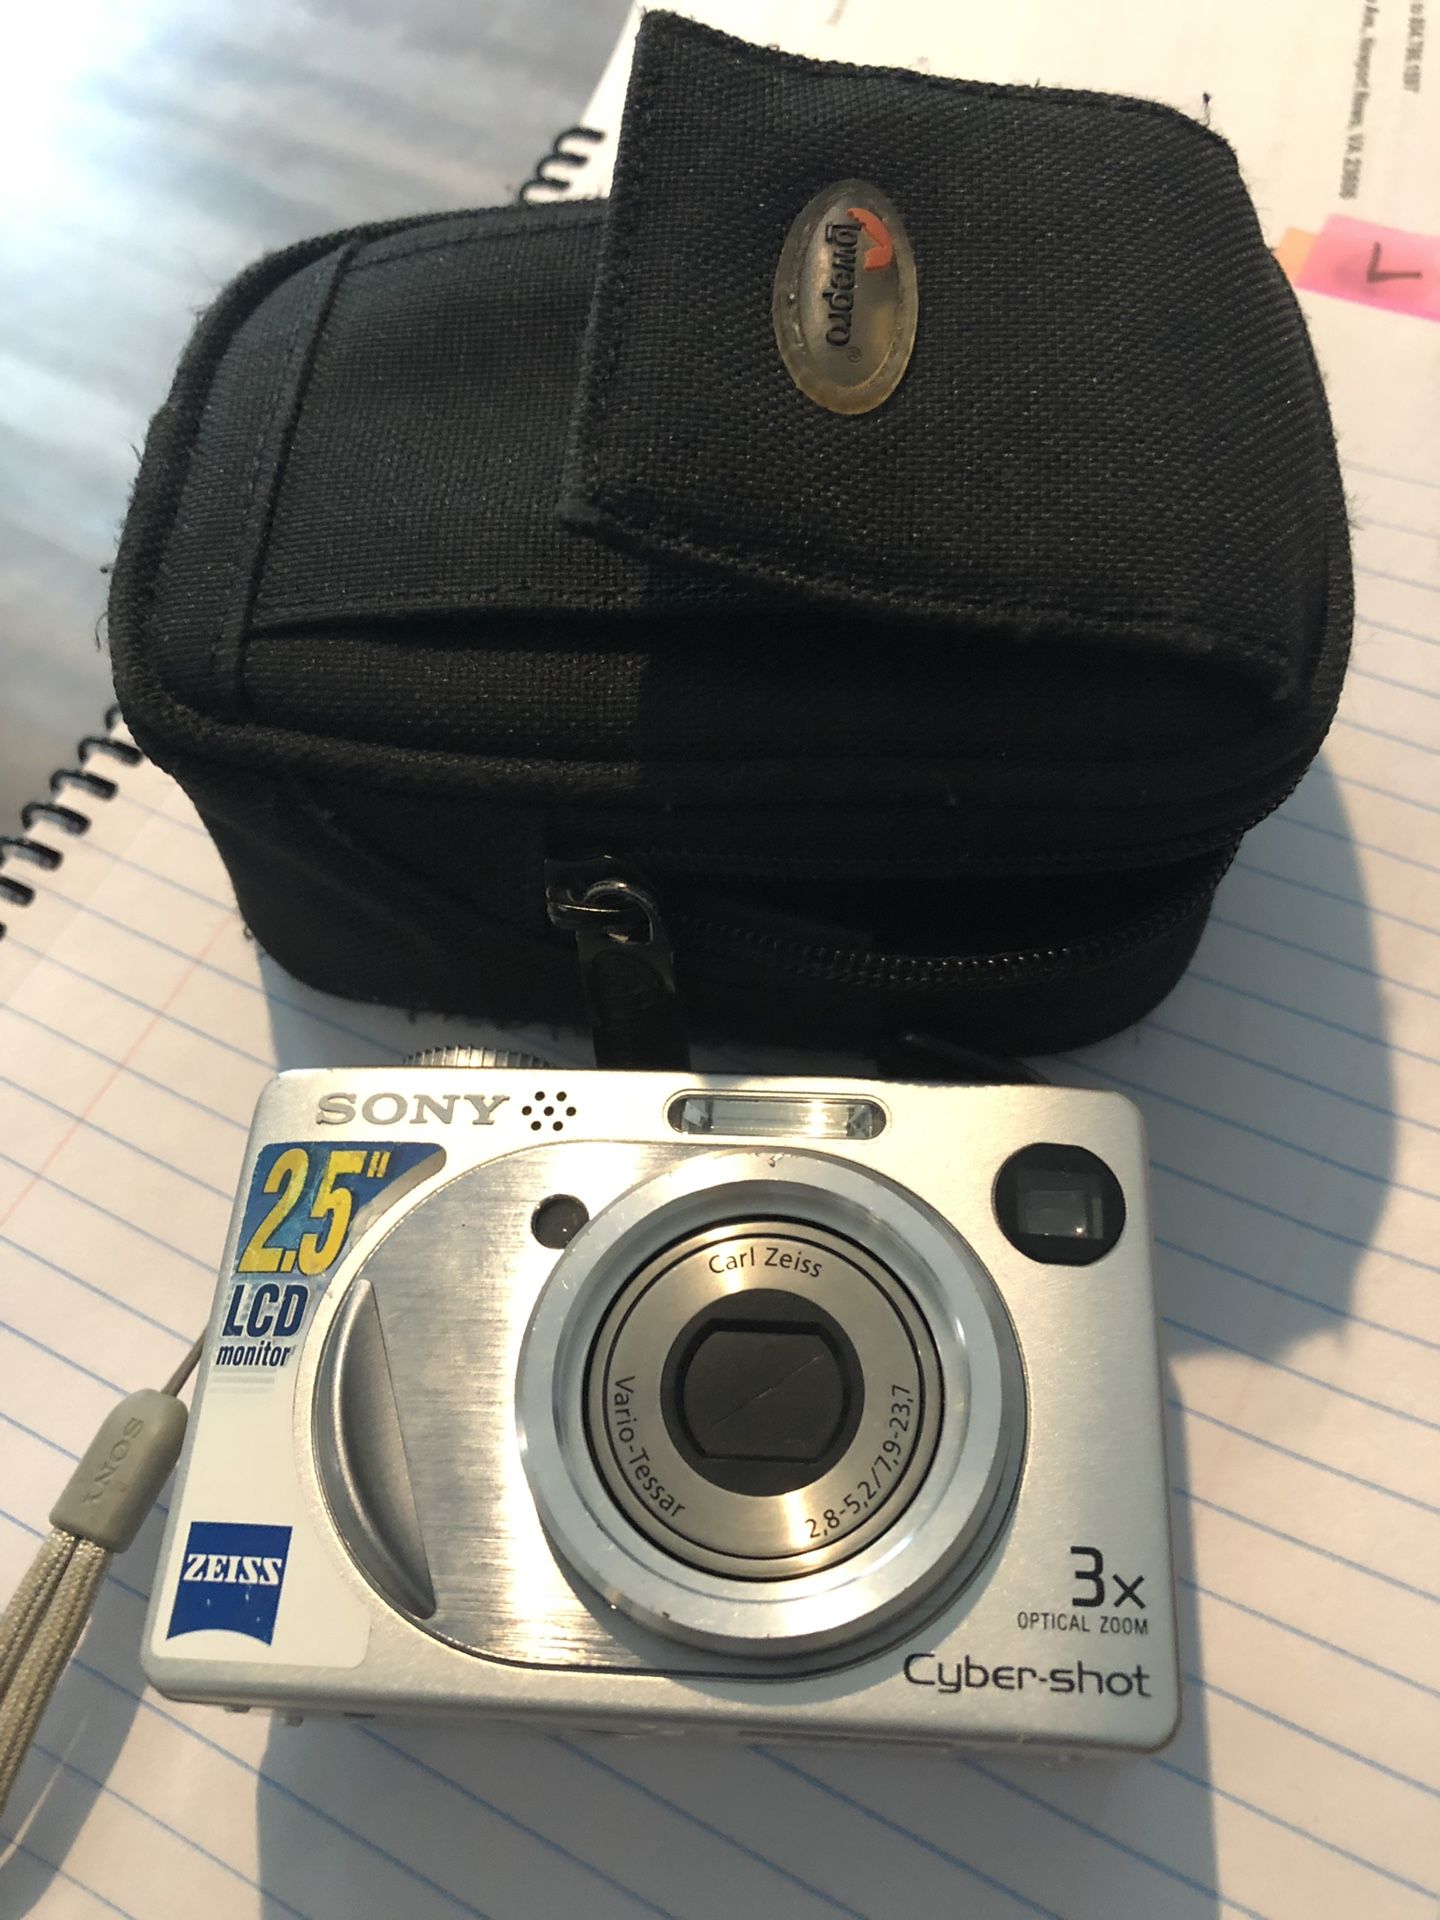 Camera and case